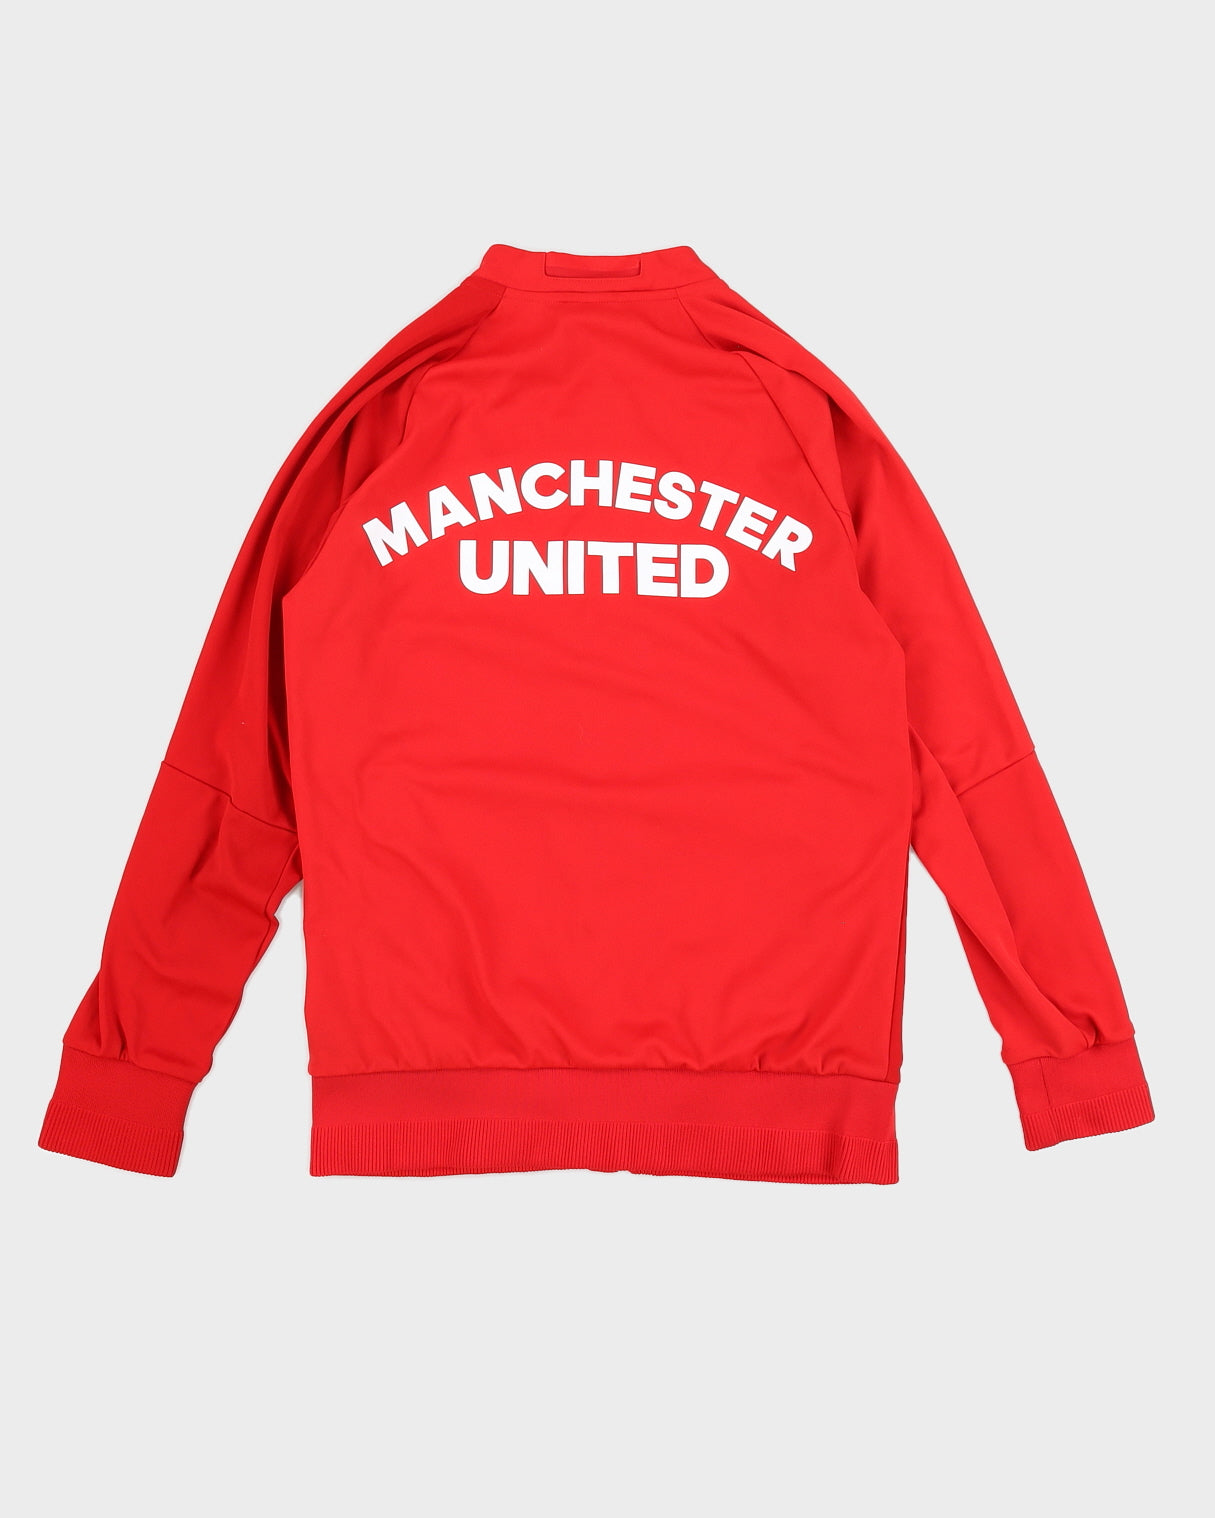 2016-2017 Adidas Manchester United Red Track Jacket - M